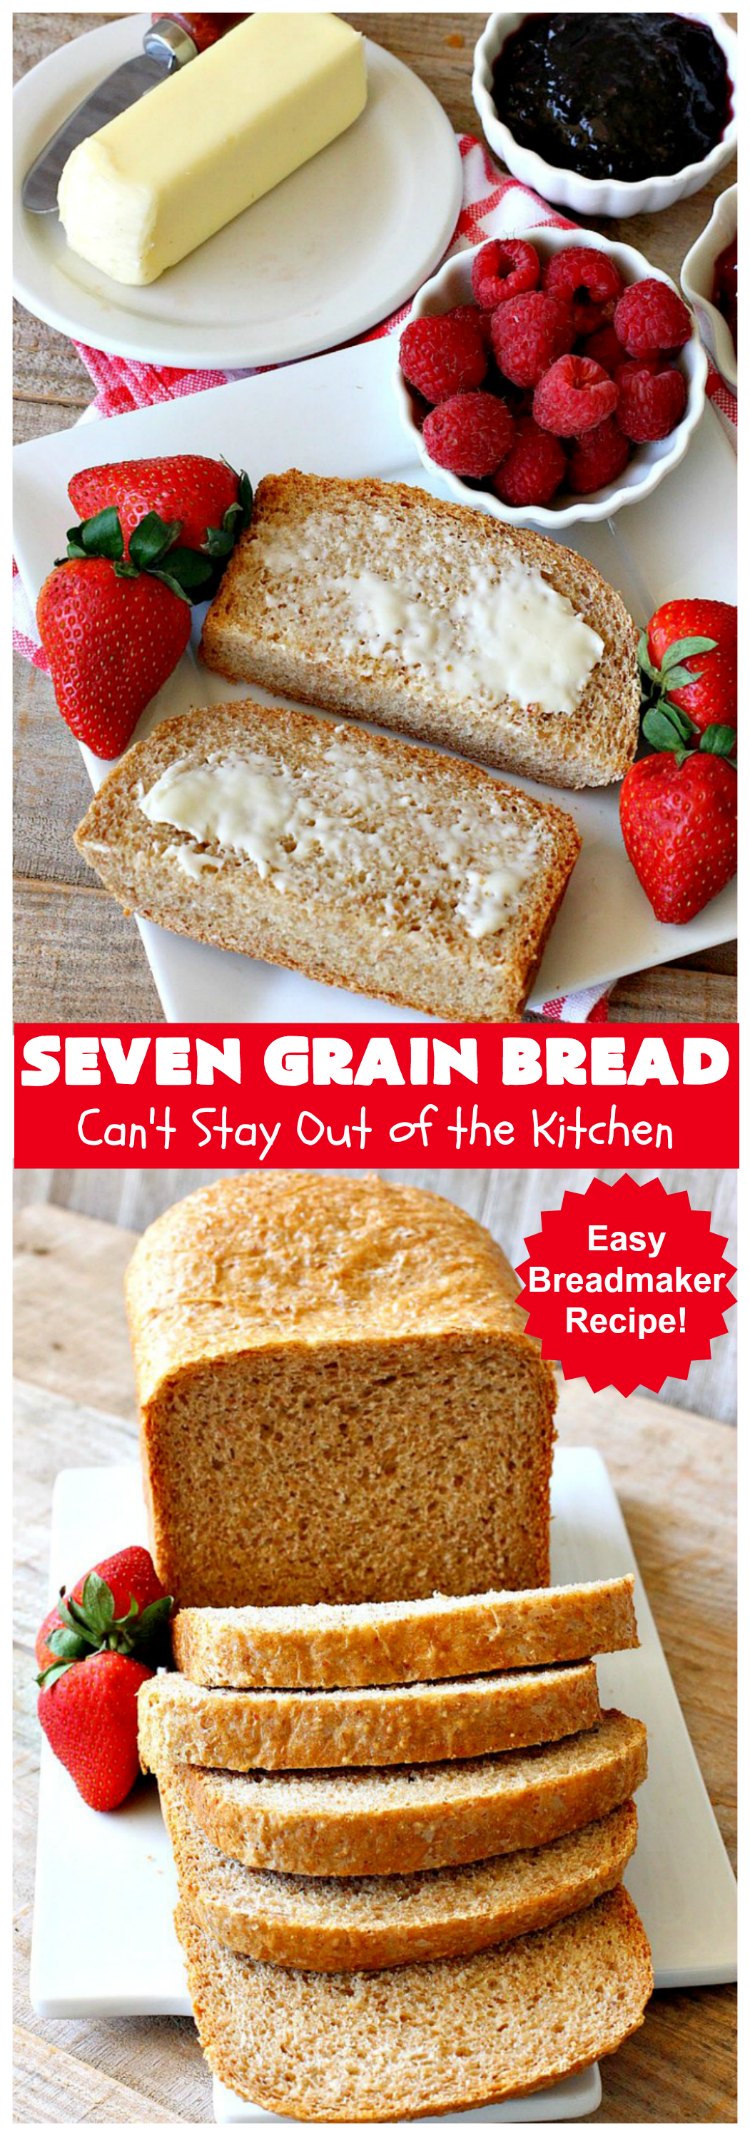 Seven Grain Bread | Can't Stay Out of the Kitchen | this delicious home-baked #bread is perfect for either #breakfast or dinner. It's also incredibly easy since it's made in the #breadmaker. This #recipe uses #VitalWheatGluten so it's light and fluffy. #SevenGrainCereal #SevenGrainBread 